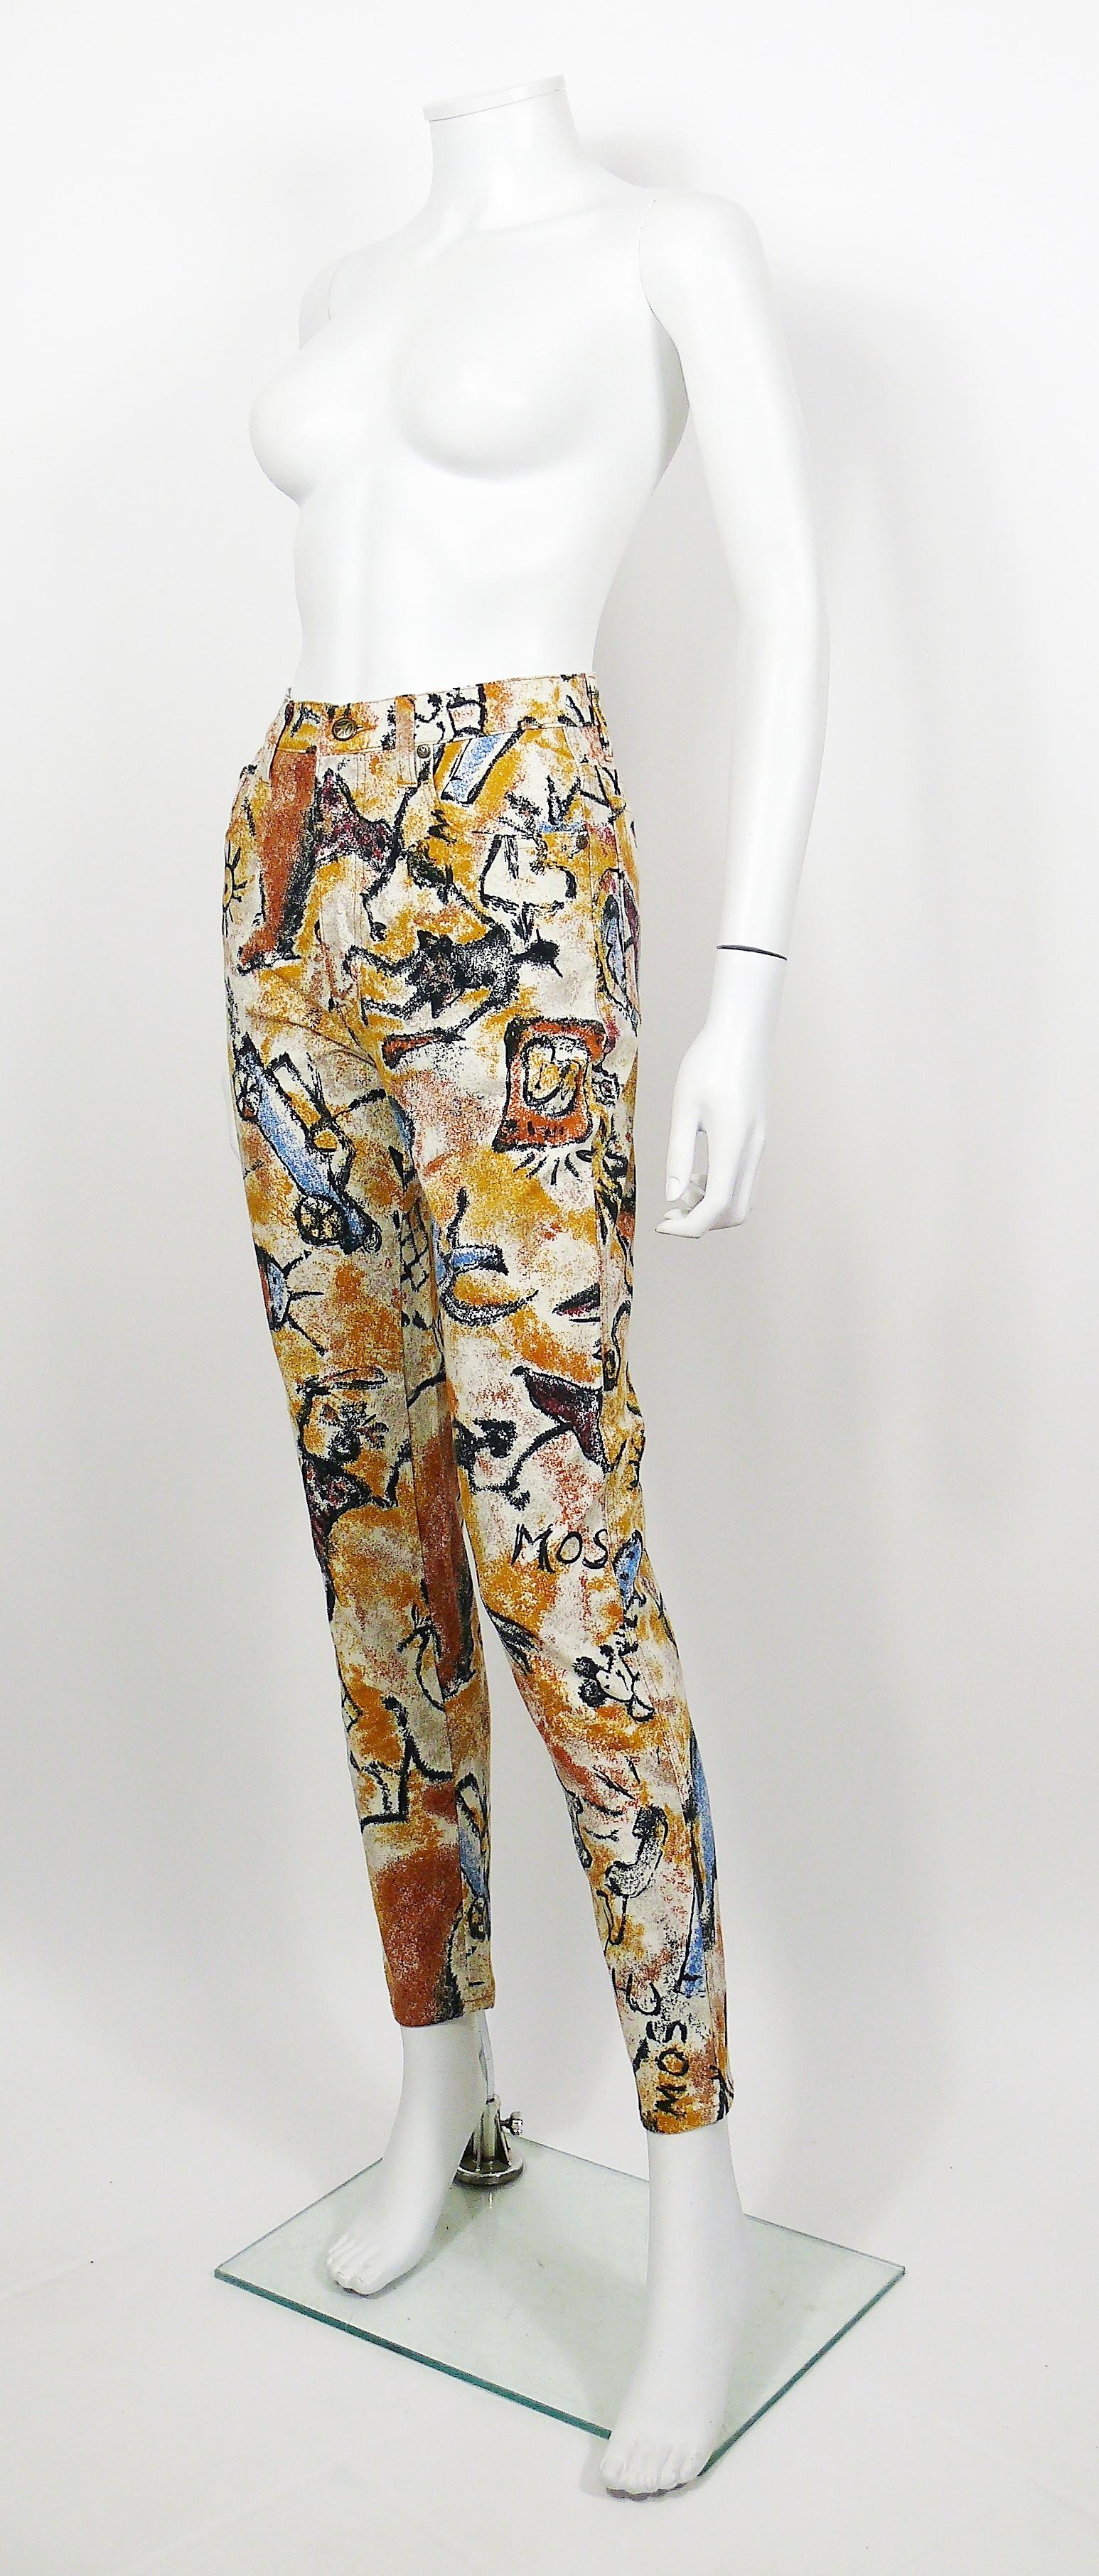 MOSCHINO vintage 1990s trousers featuring an opulent cave paintings print all over, MOSCHINO and peace sign.

These trousers feature :
- Cotton blend with stretch.
- Front buttoning and zip.
- Bronze toned peace sign button and rivets.
- Front and